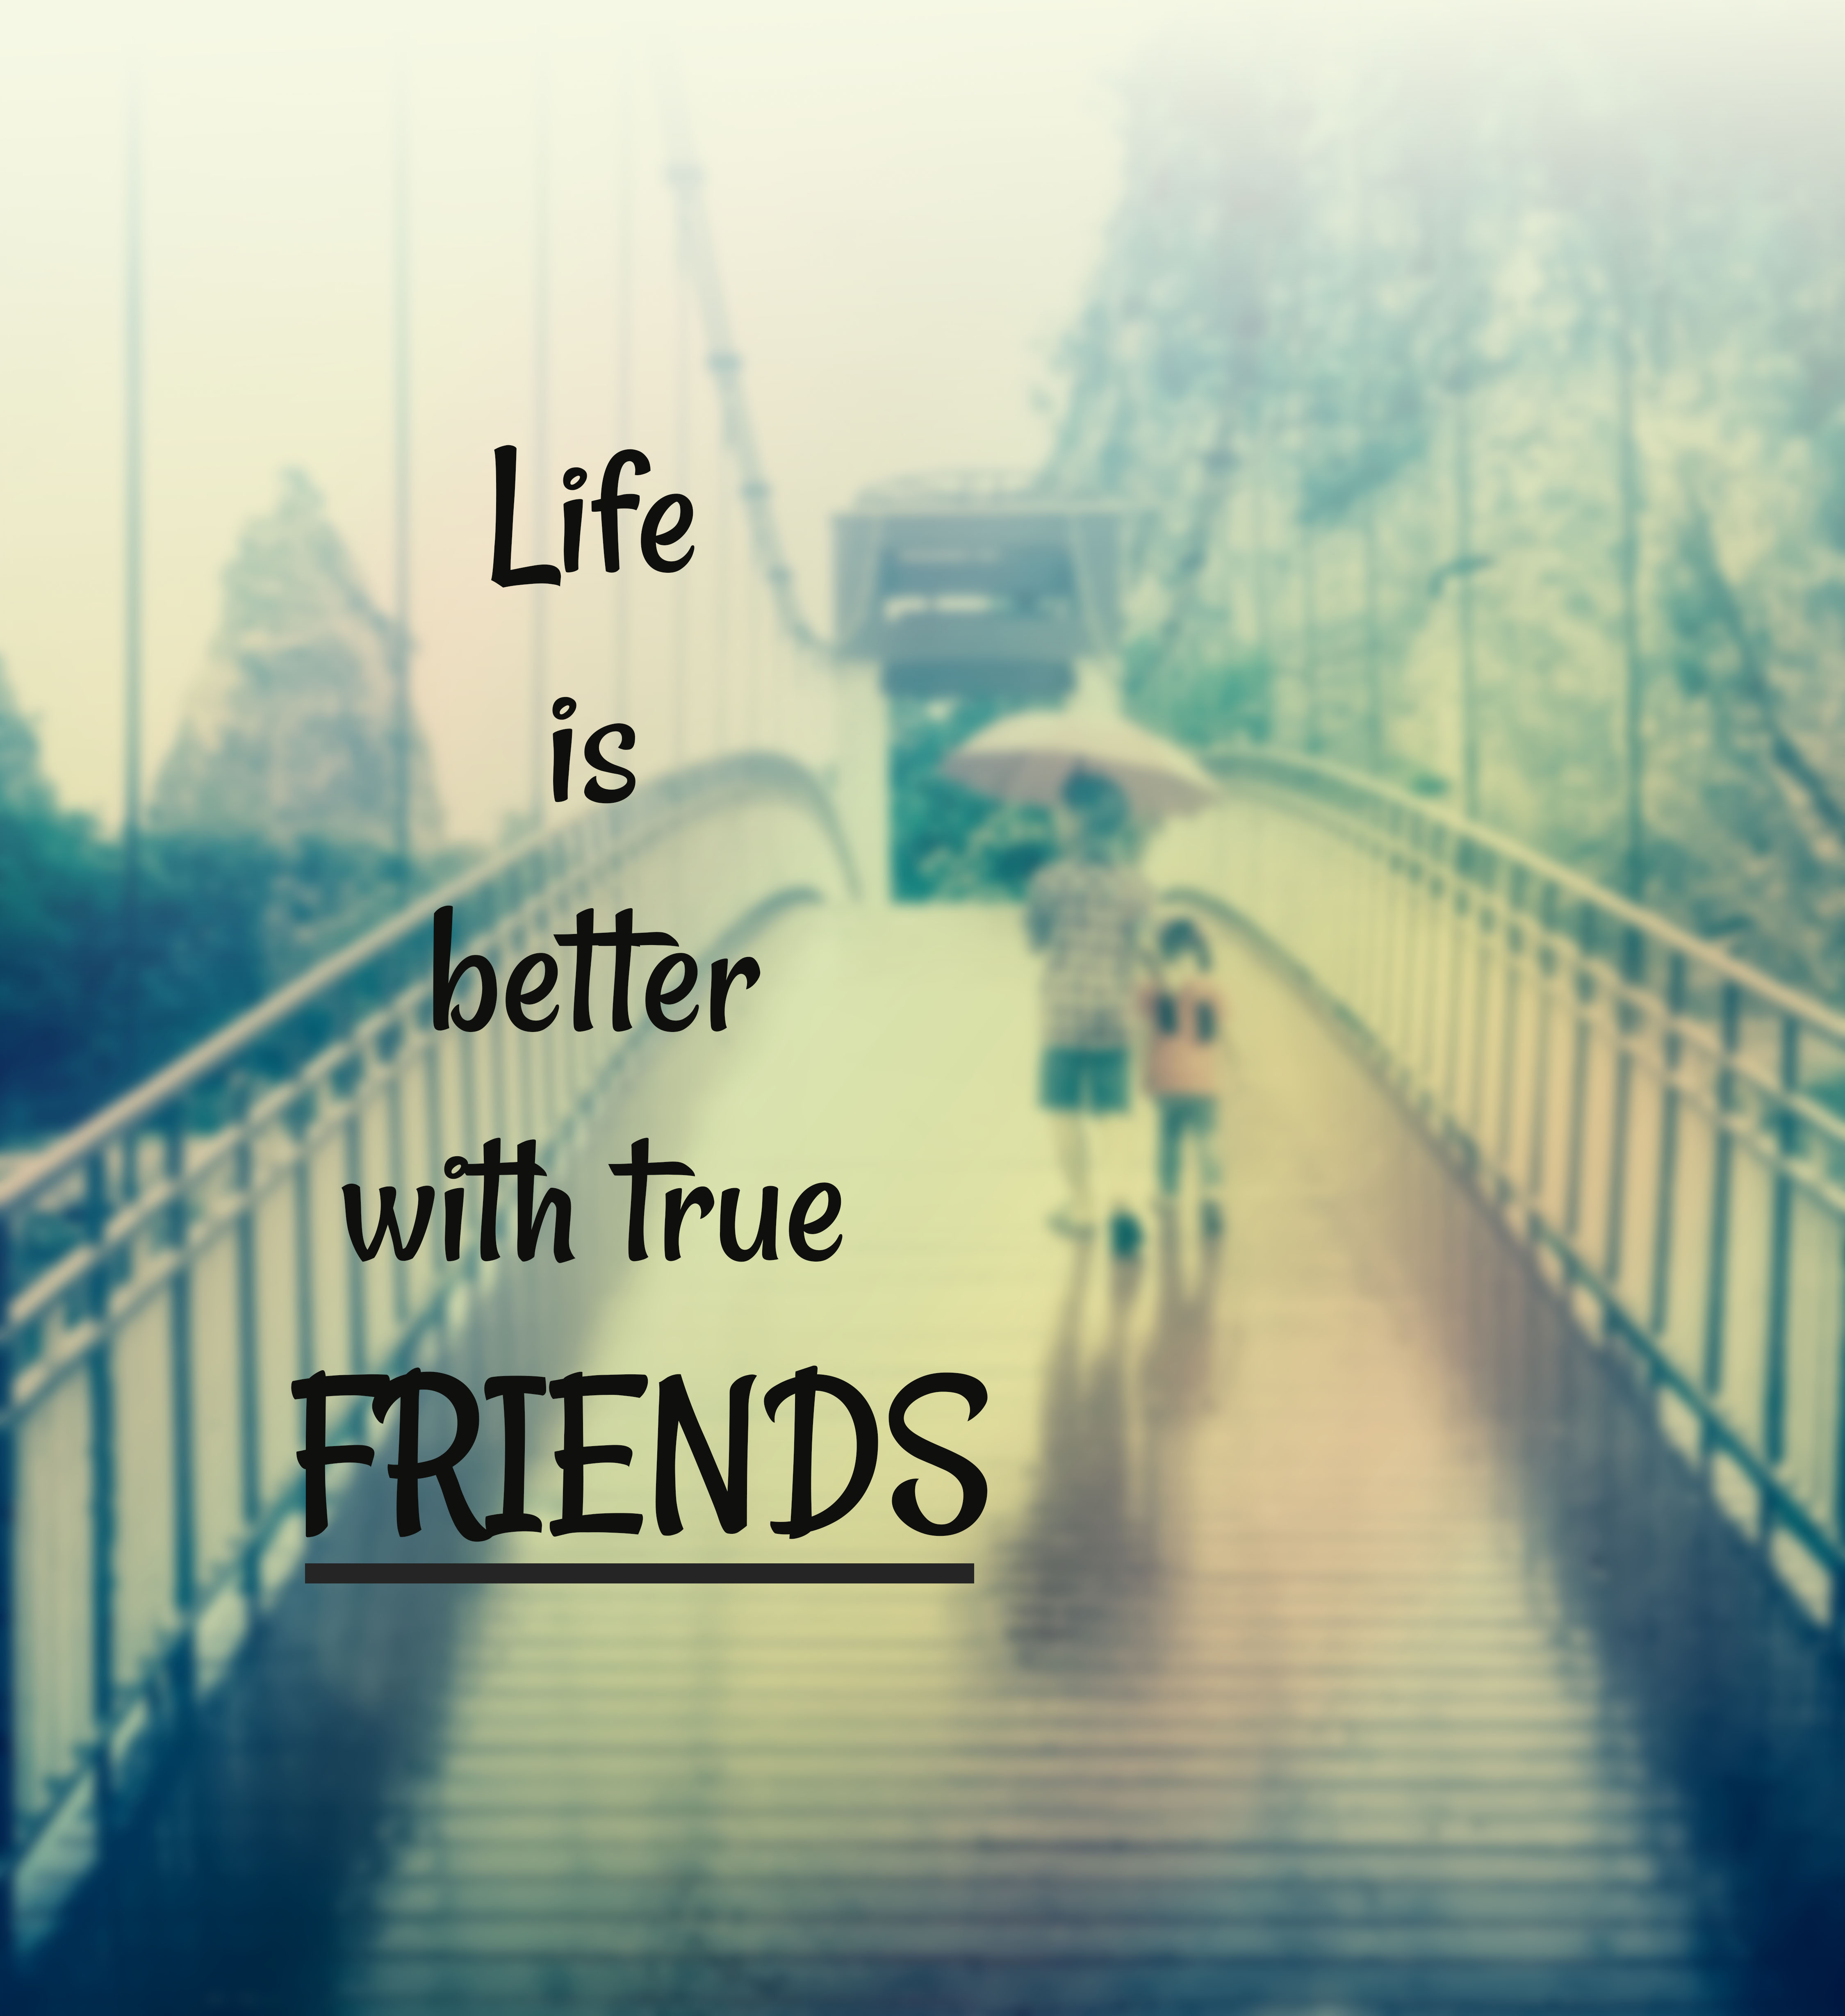 Happy National Best Friend Day 2022 Wishes, Images, Status, Quotes